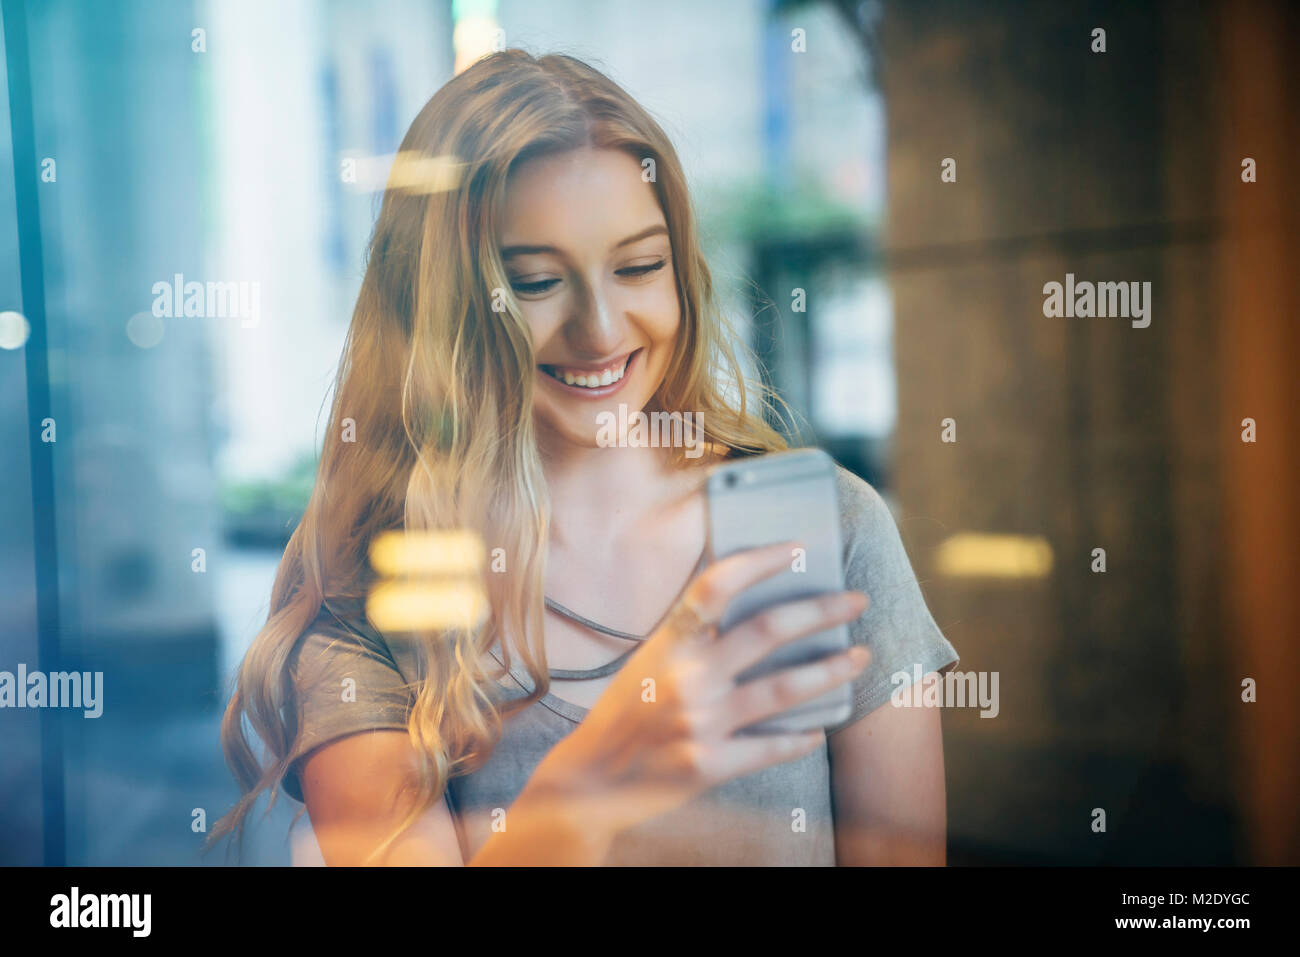 Smiling Caucasian woman posing for cell phone selfie behind window Stock Photo